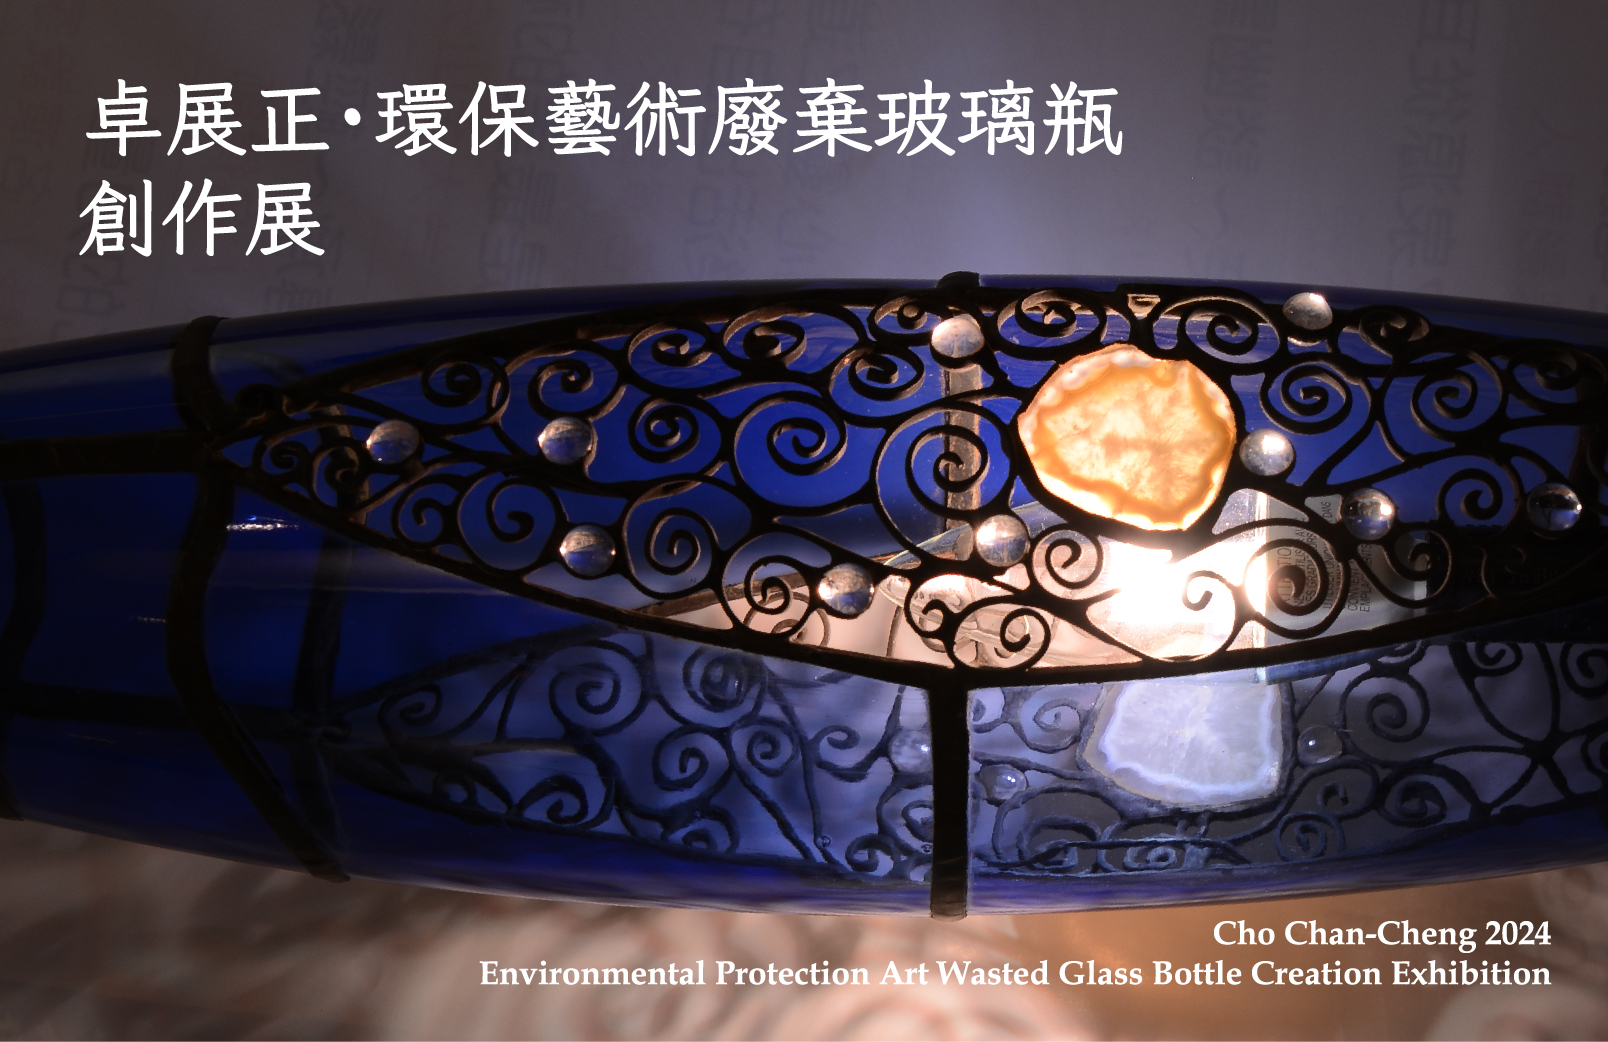 Featured image for “2024-卓展正環保藝術廢棄玻璃瓶創作展 2024- Cho Chan-Cheng Environmental Protection Art Wasted Glass Bottle Creation Exhibition”